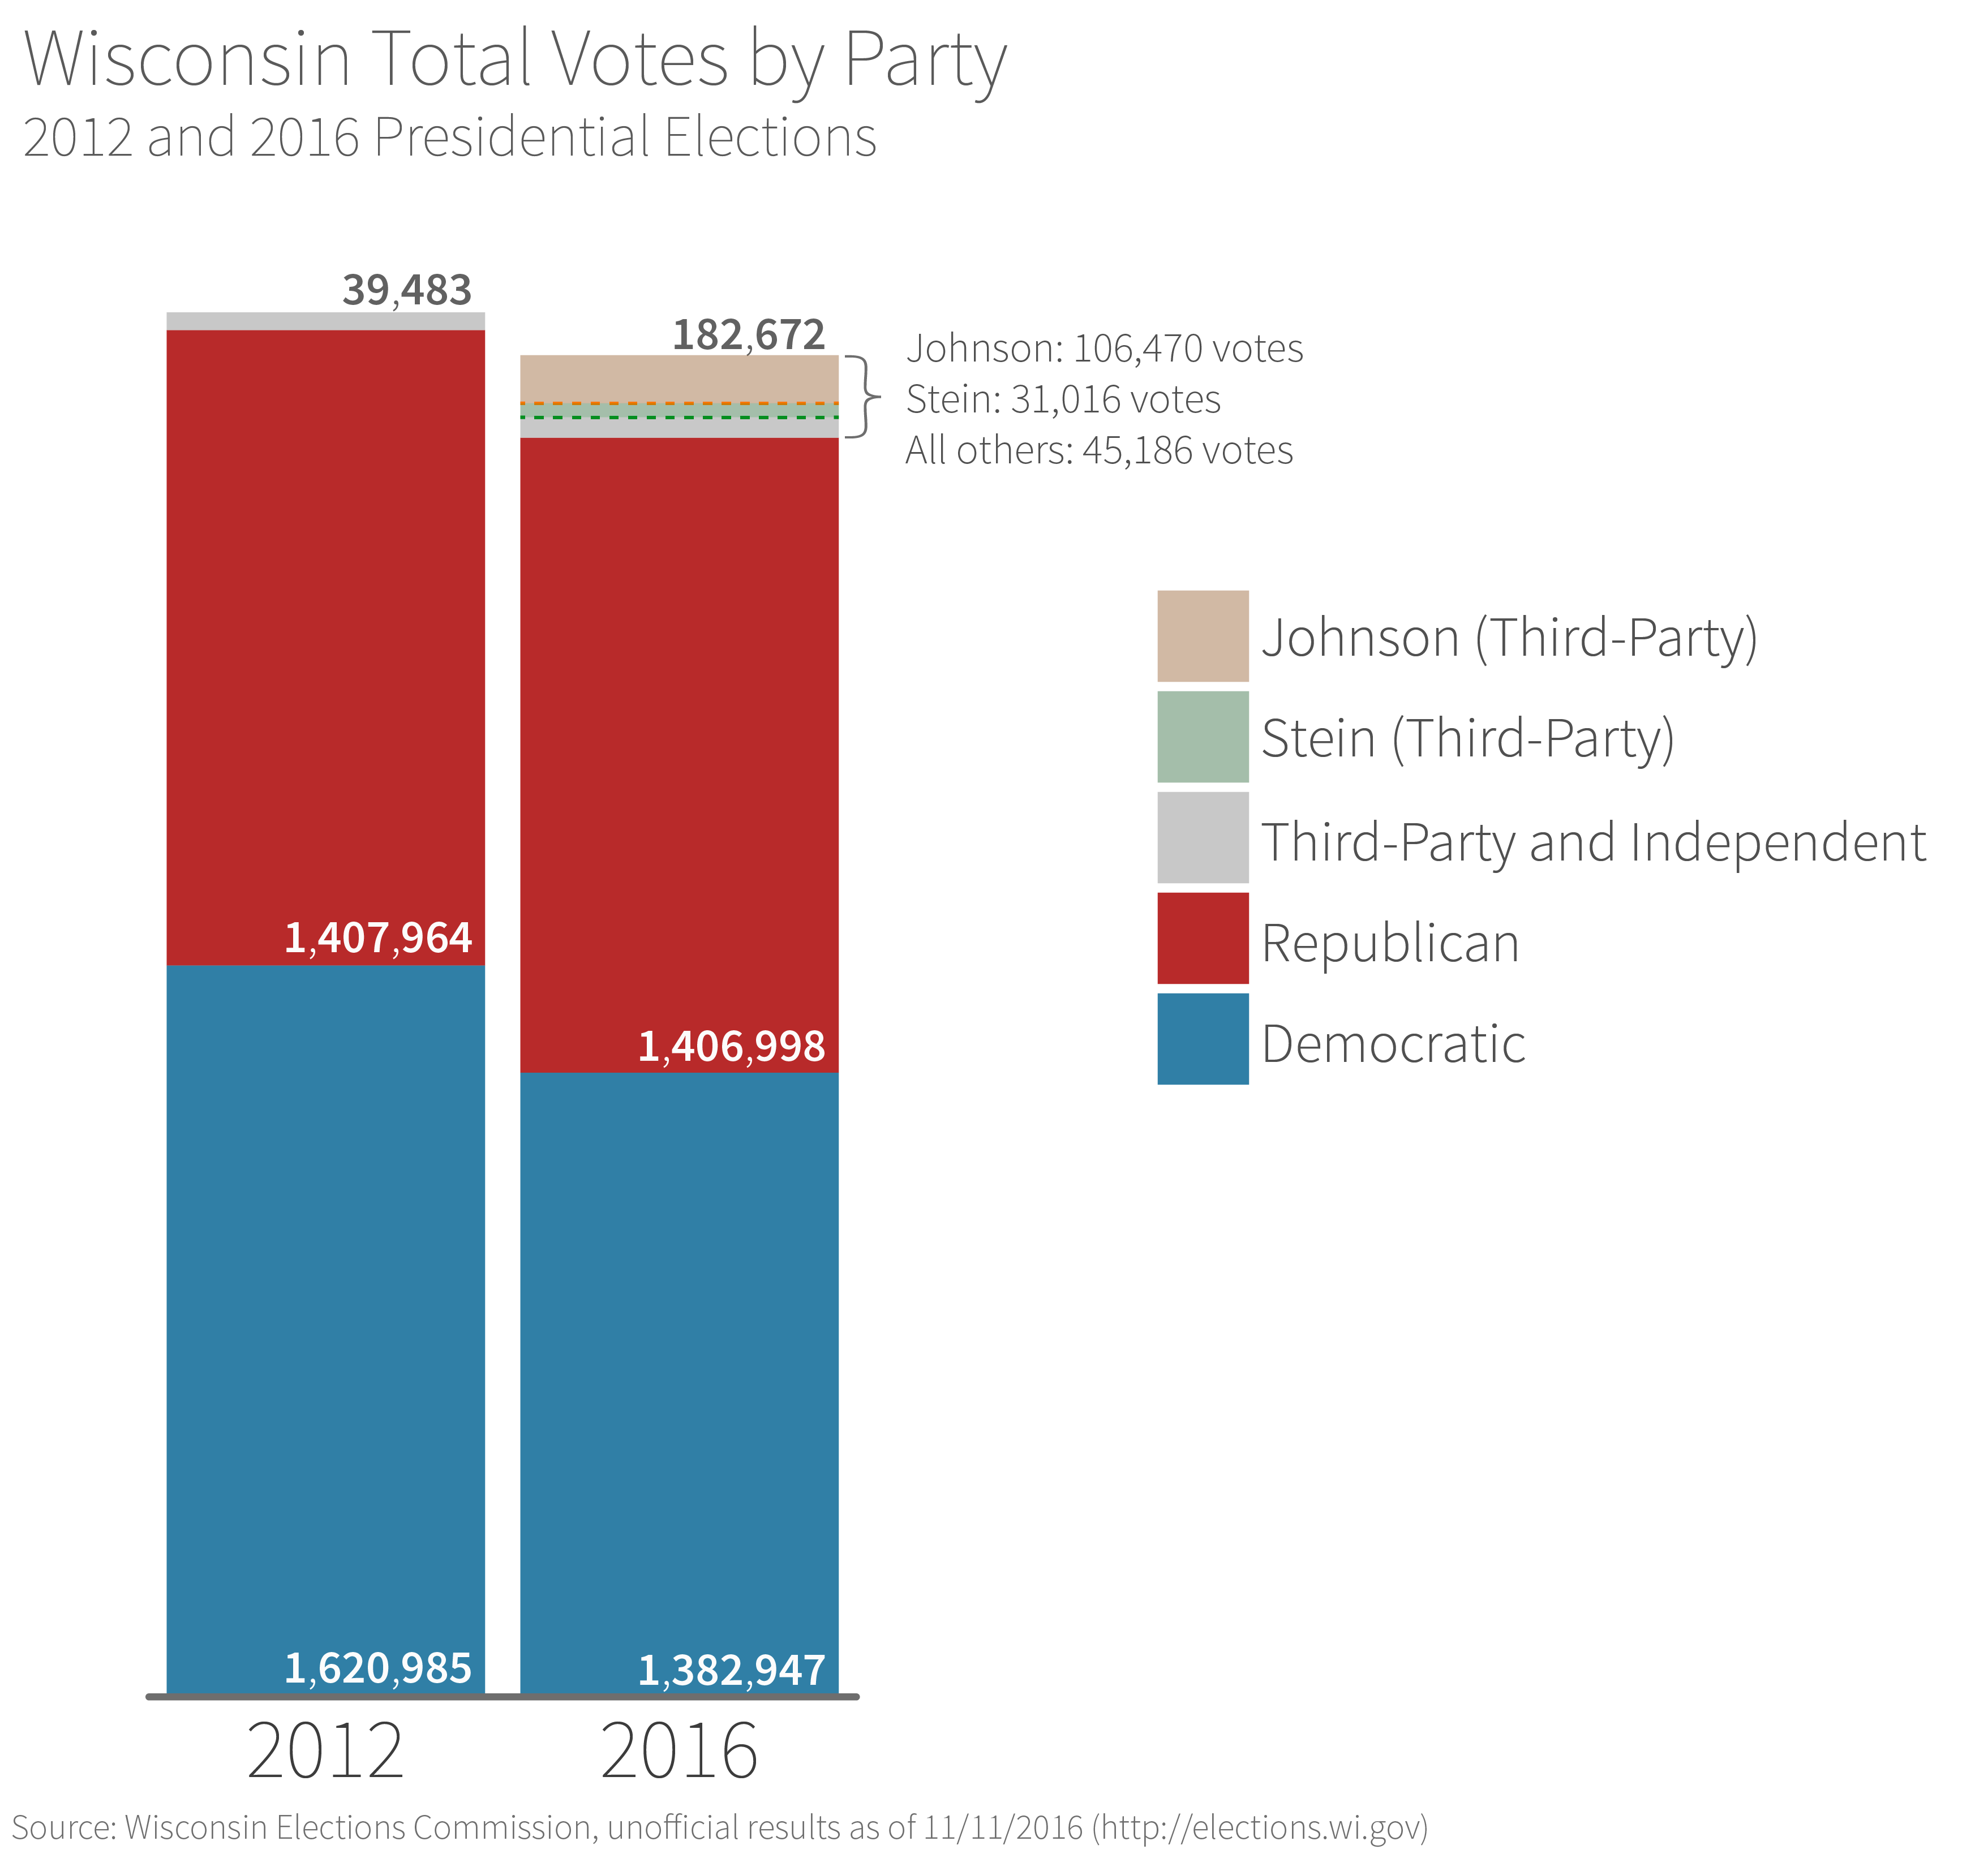 chart showing Wisconsin vote totals by party, 2012 and 2016 elections